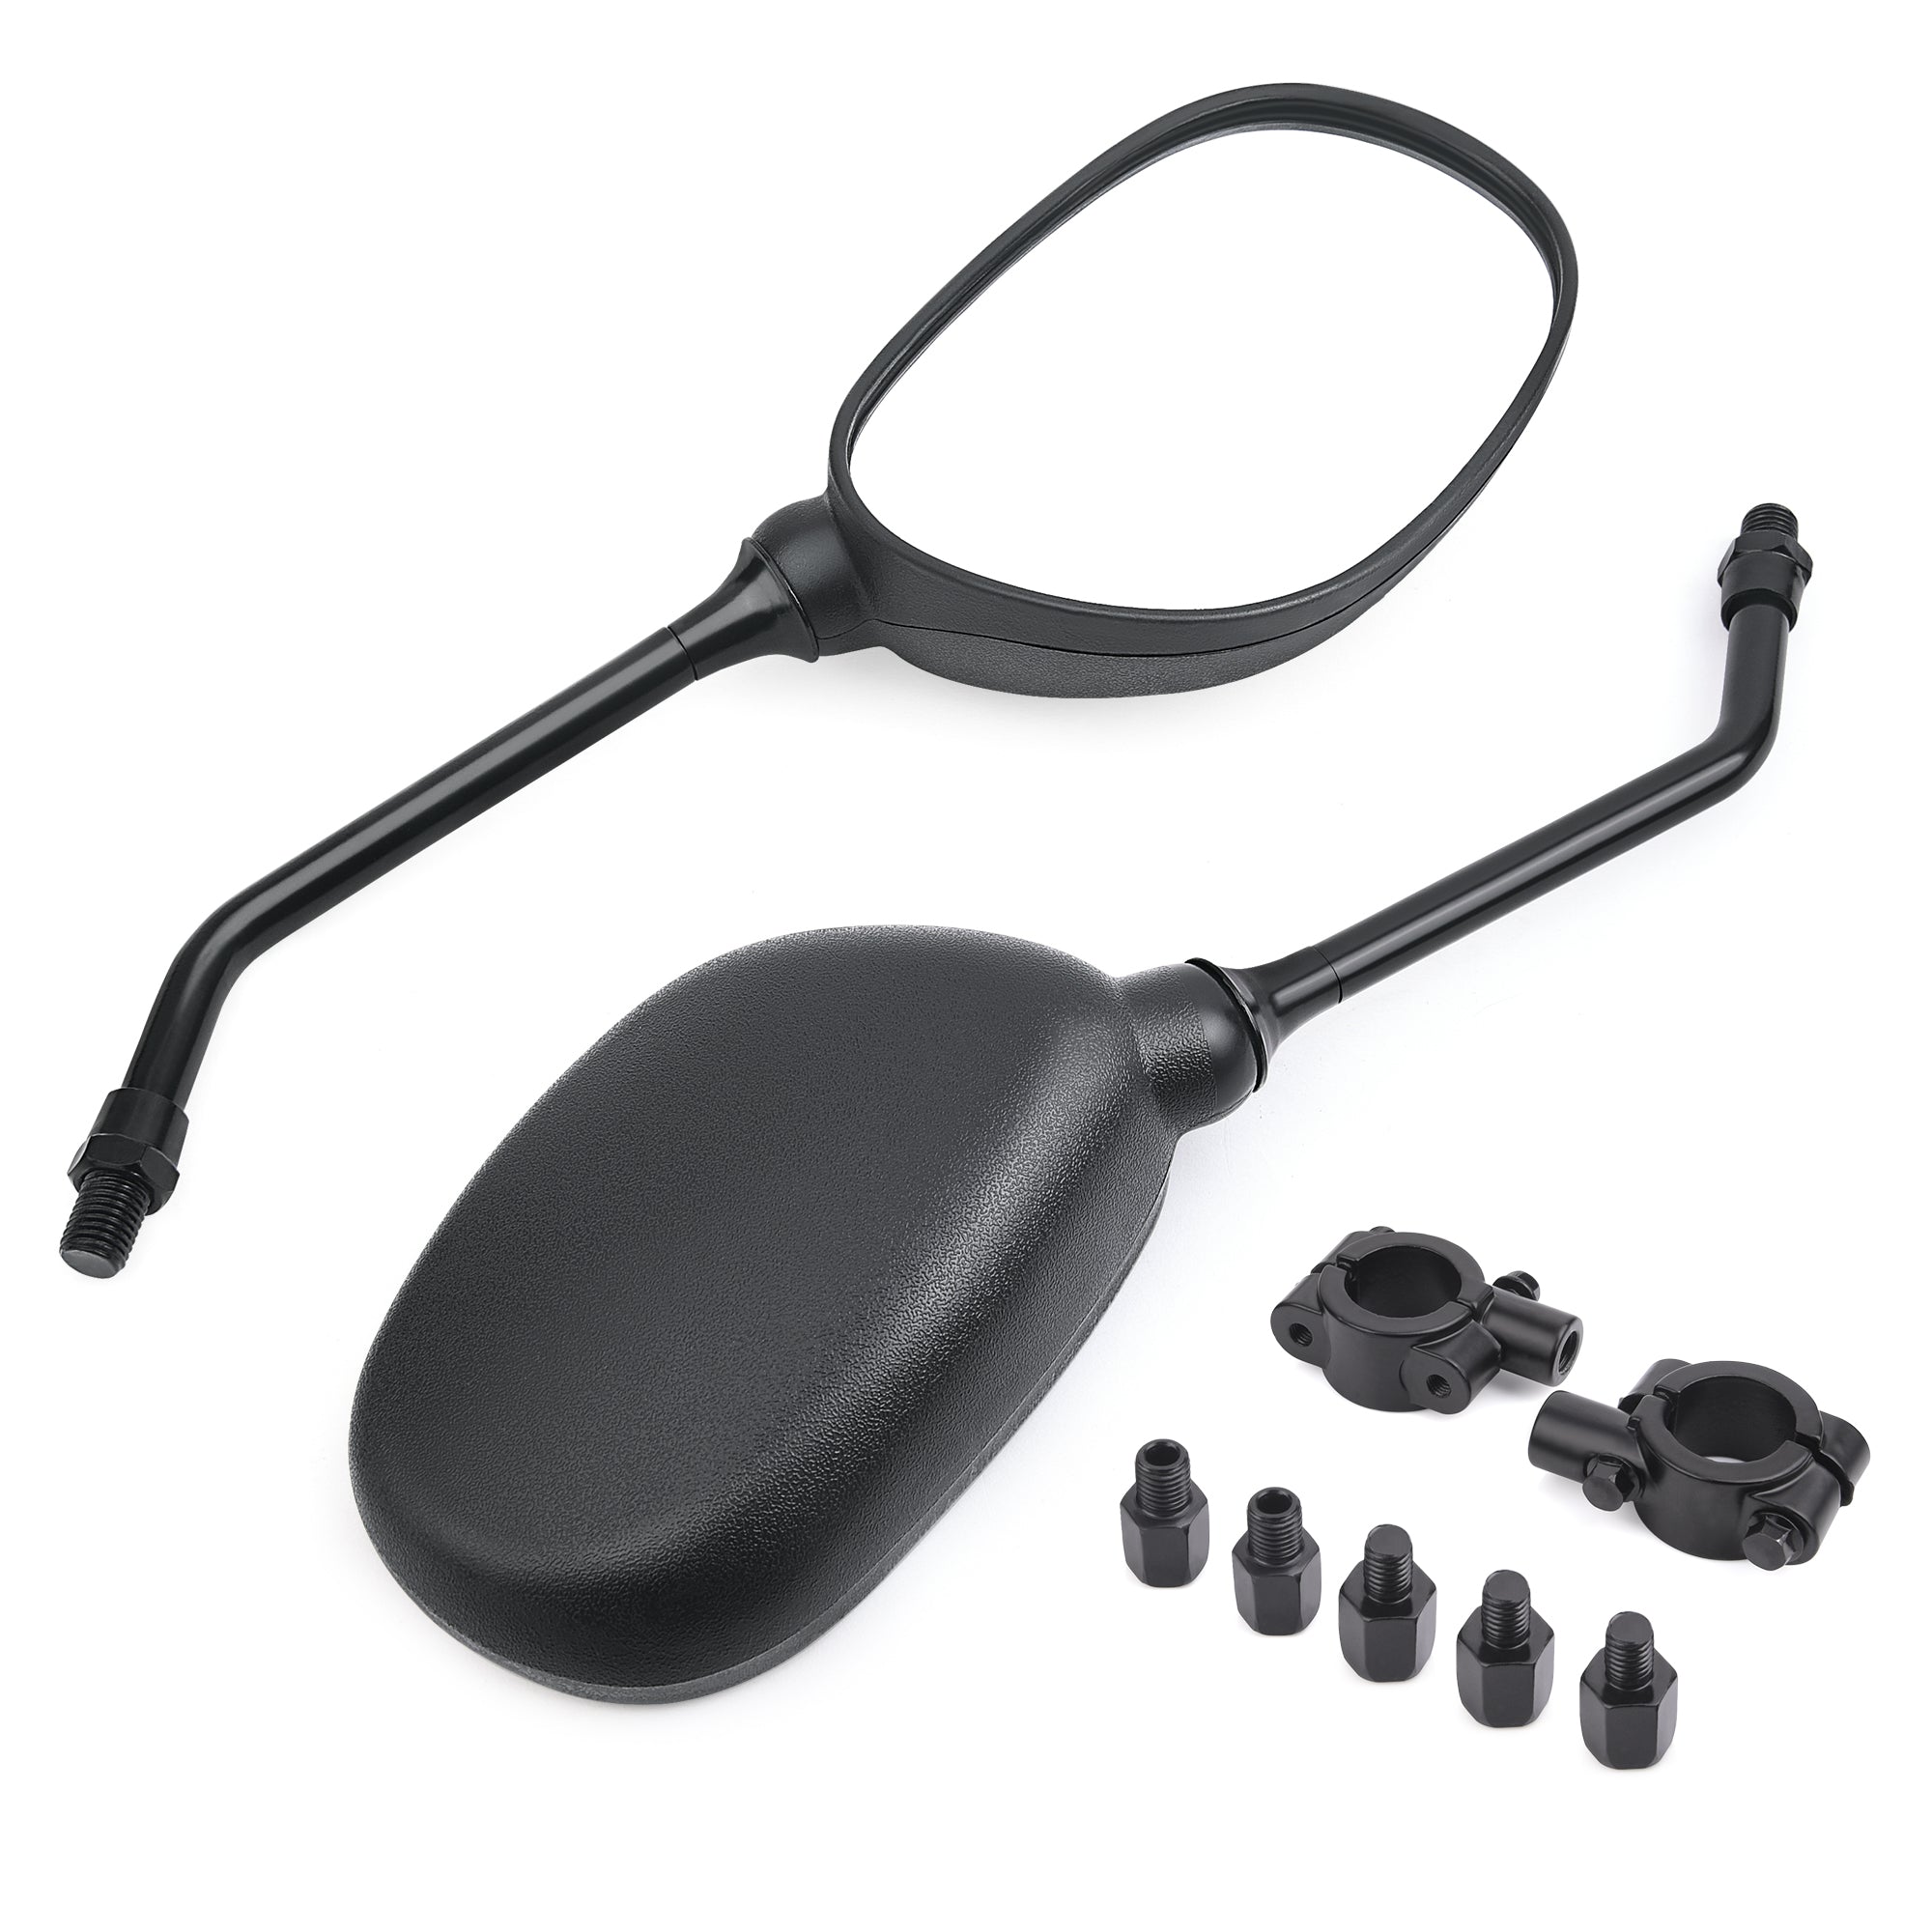 ATV Side Rear View Mirrors - 360 Degrees Ball-Type Adjustment with Threaded Bolt, 7/8" Handle Bar Mount Clamp